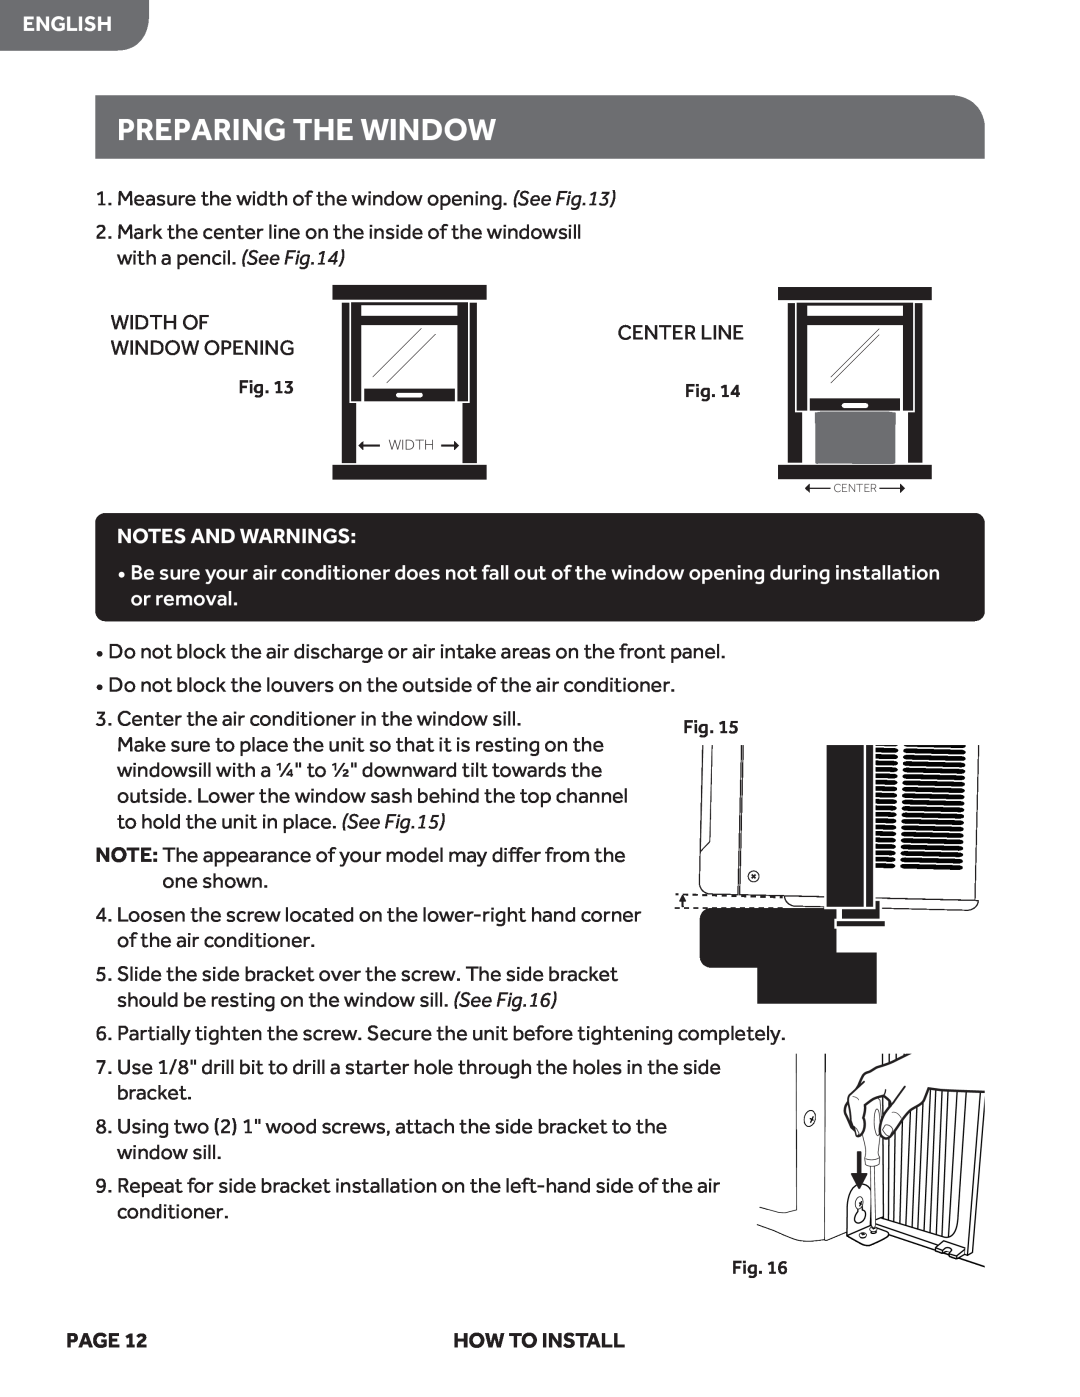 Haier HWE08XCN, HWE10XCN, HWE12XCN, HWE06XCN user manual Preparing The Window, English, Notes And Warnings 